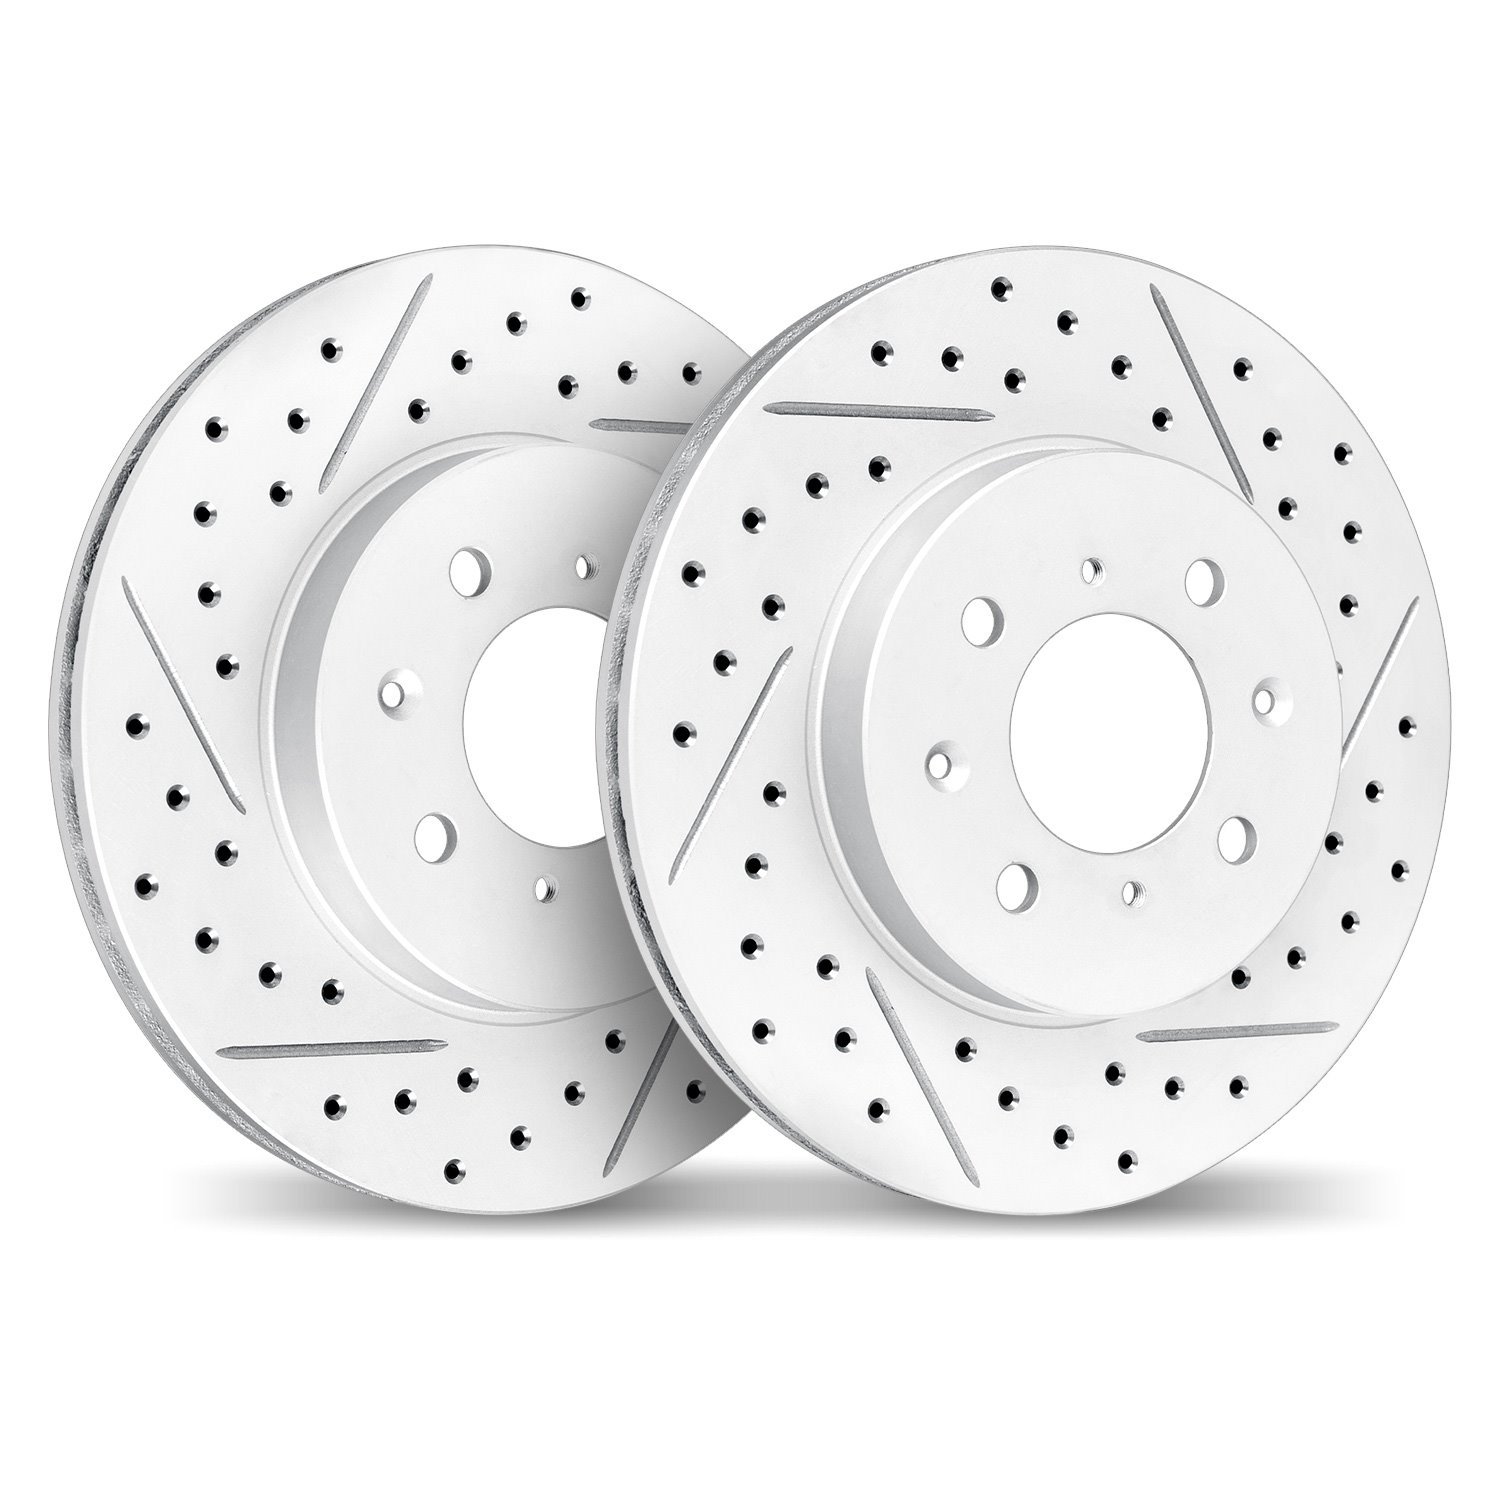 2002-80020 Geoperformance Drilled/Slotted Brake Rotors, 1990-1993 Ford/Lincoln/Mercury/Mazda, Position: Front